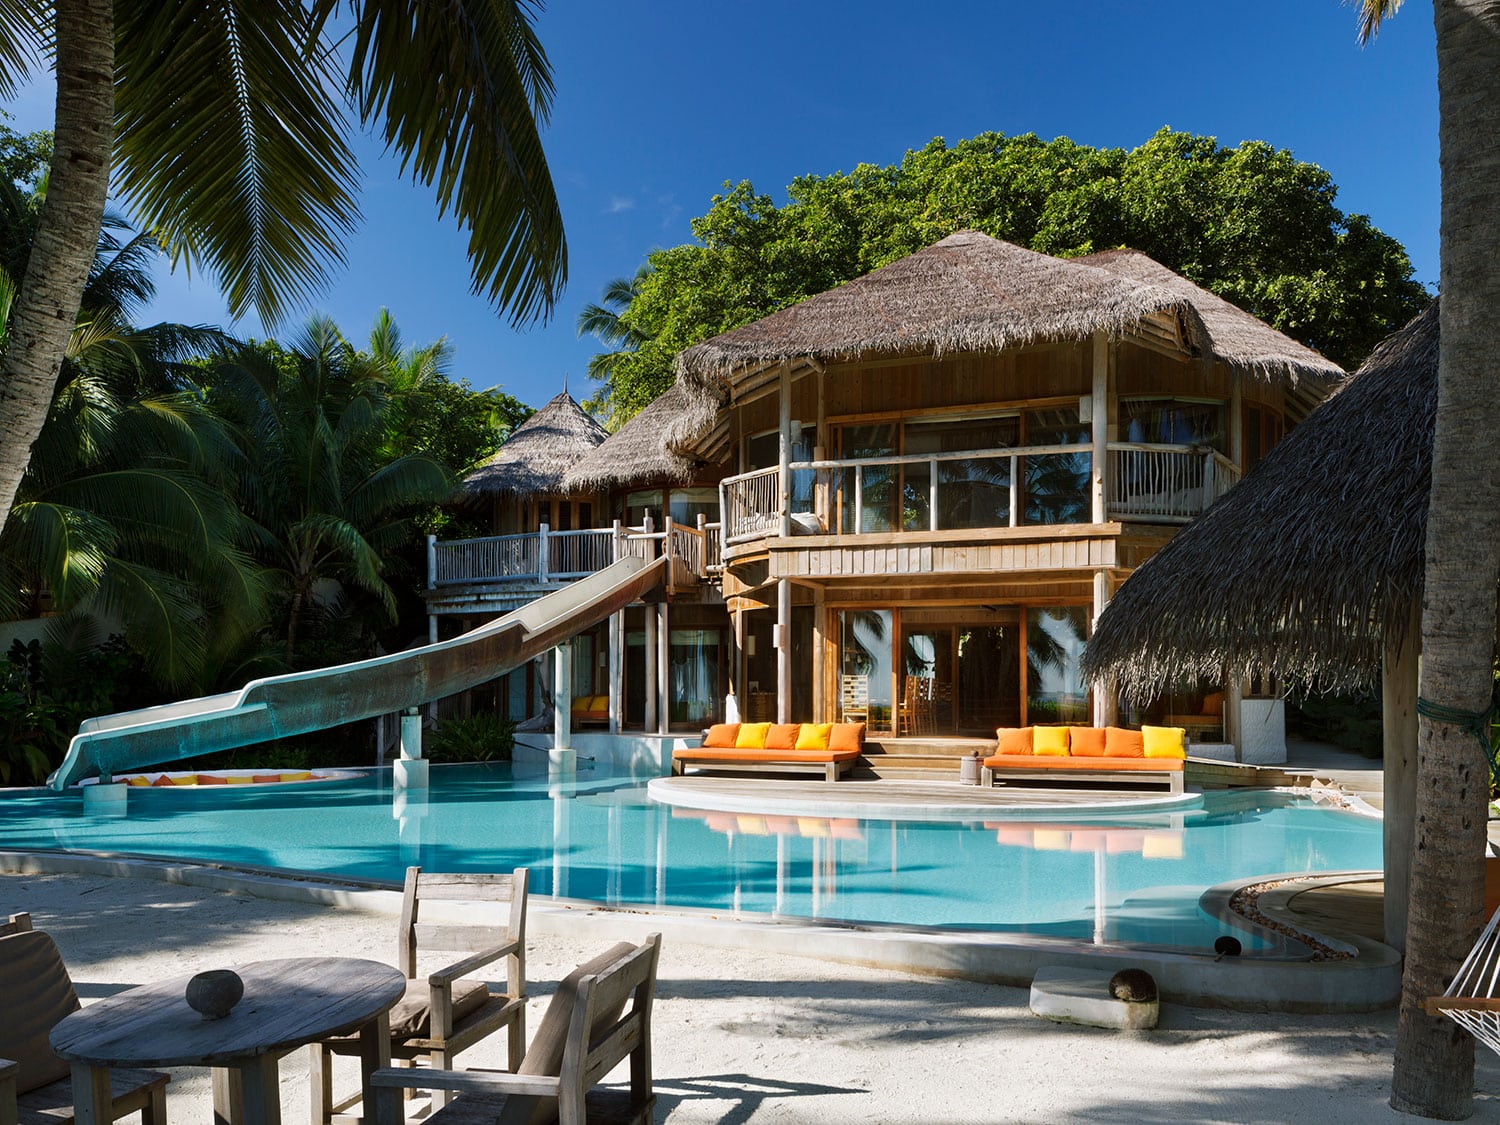 The exterior view of the pool and waterslide of Villa 15 at the Soneva Fushi resort in the Maldives.